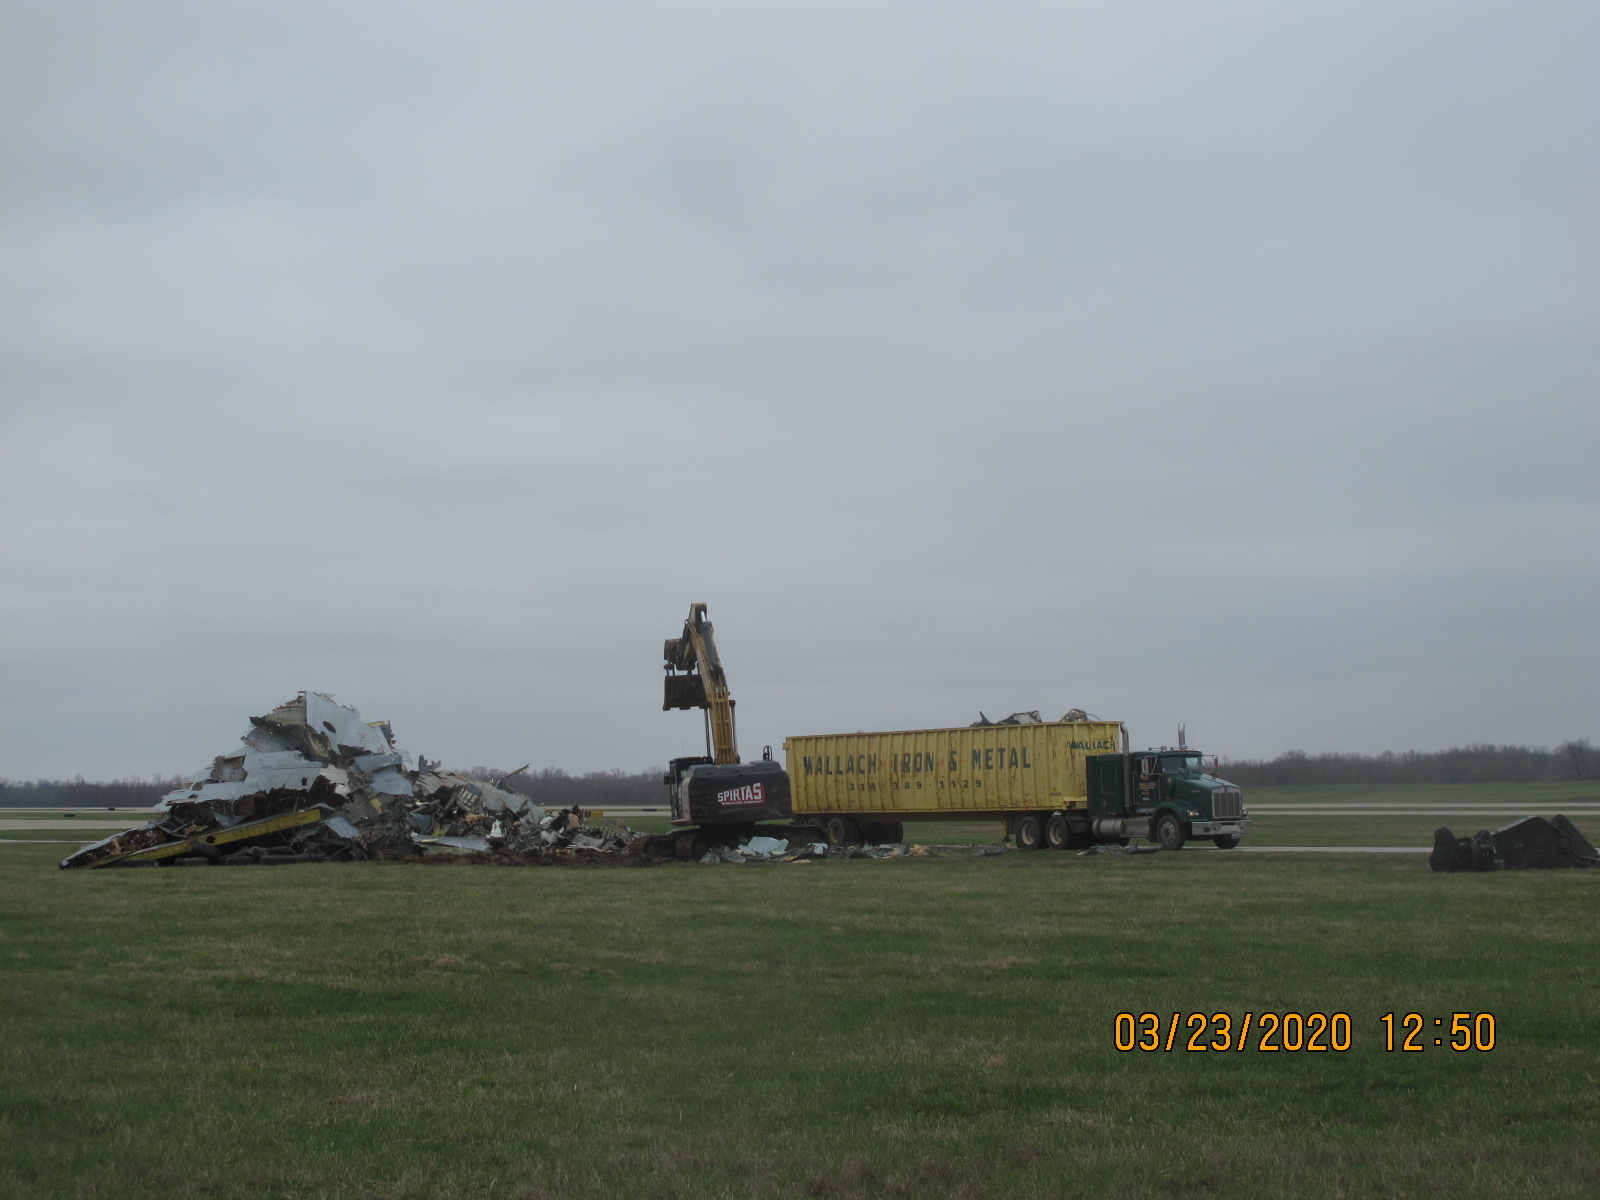 Airplane Demolition - loading the material out